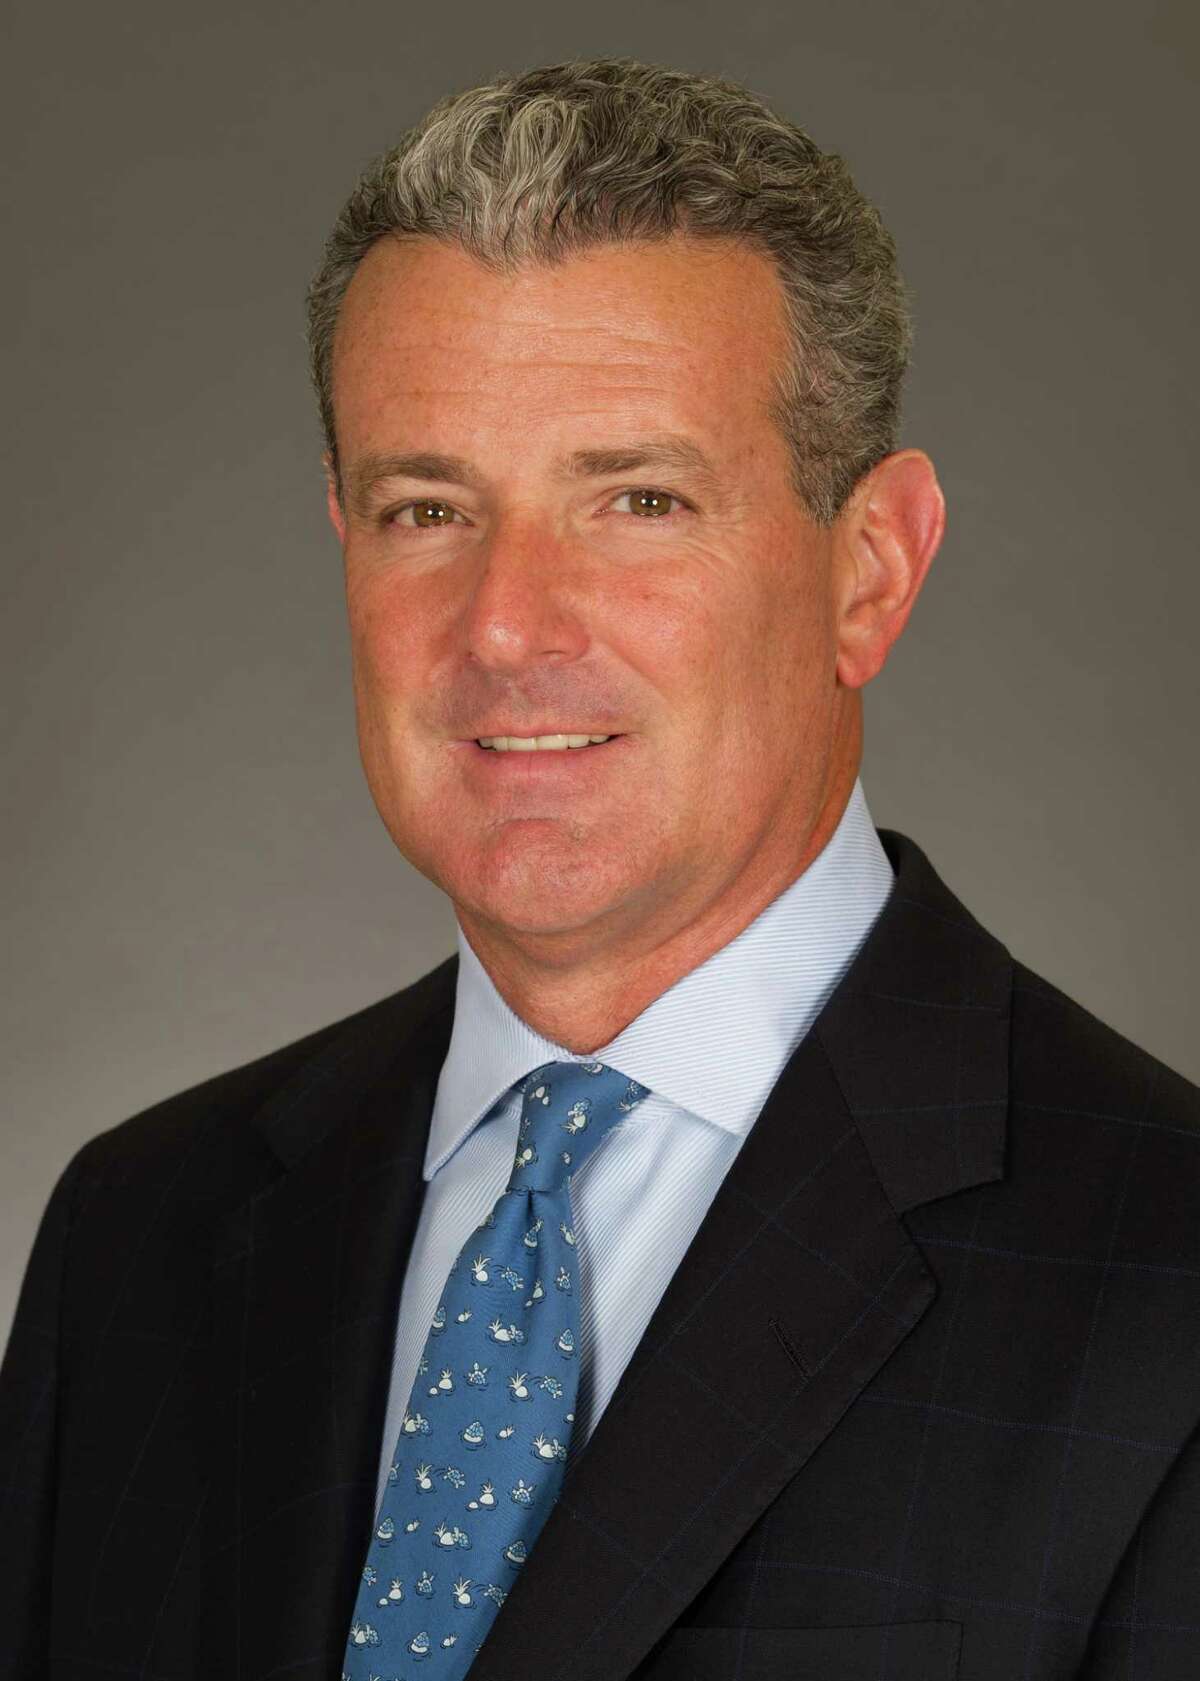 Al Walker, Chairman, President and Chief Executive Officer, Anadarko Petroleum Corp.